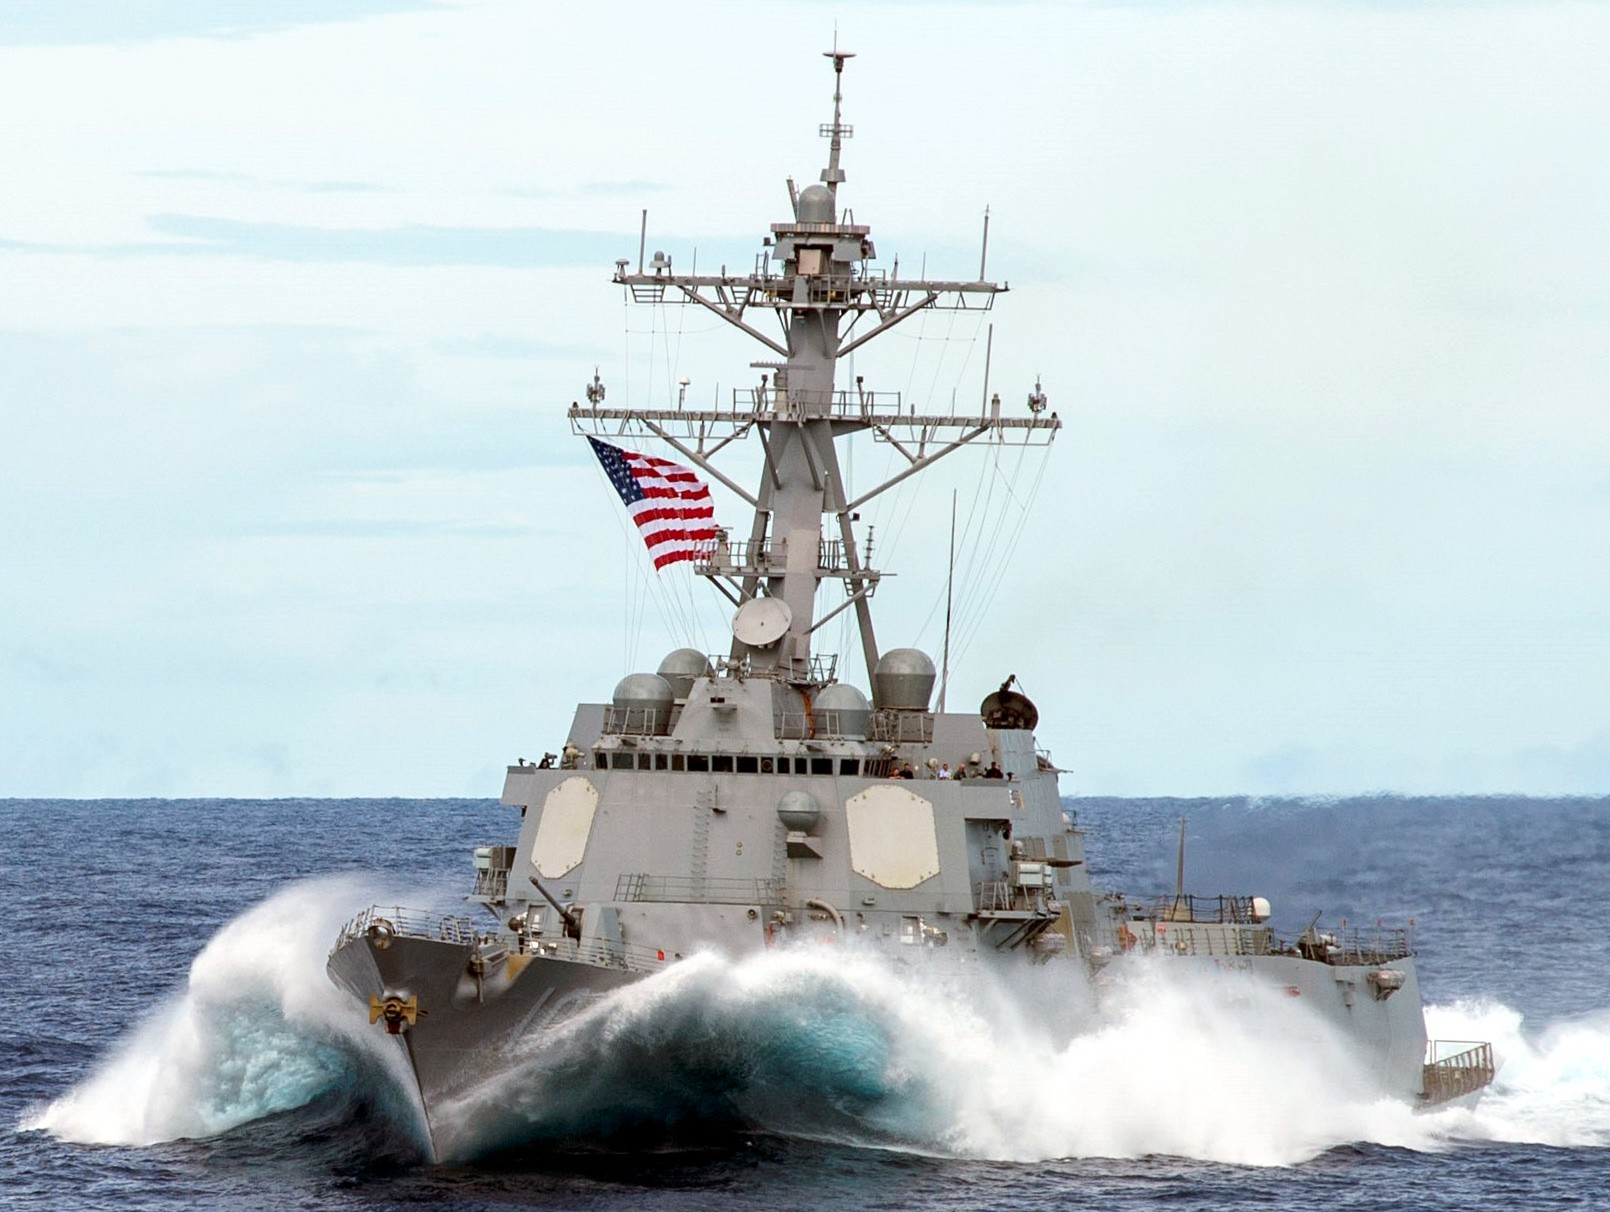 ddg-110 uss william p. lawrence arleigh burke class guided missile destroyer aegis us navy 22